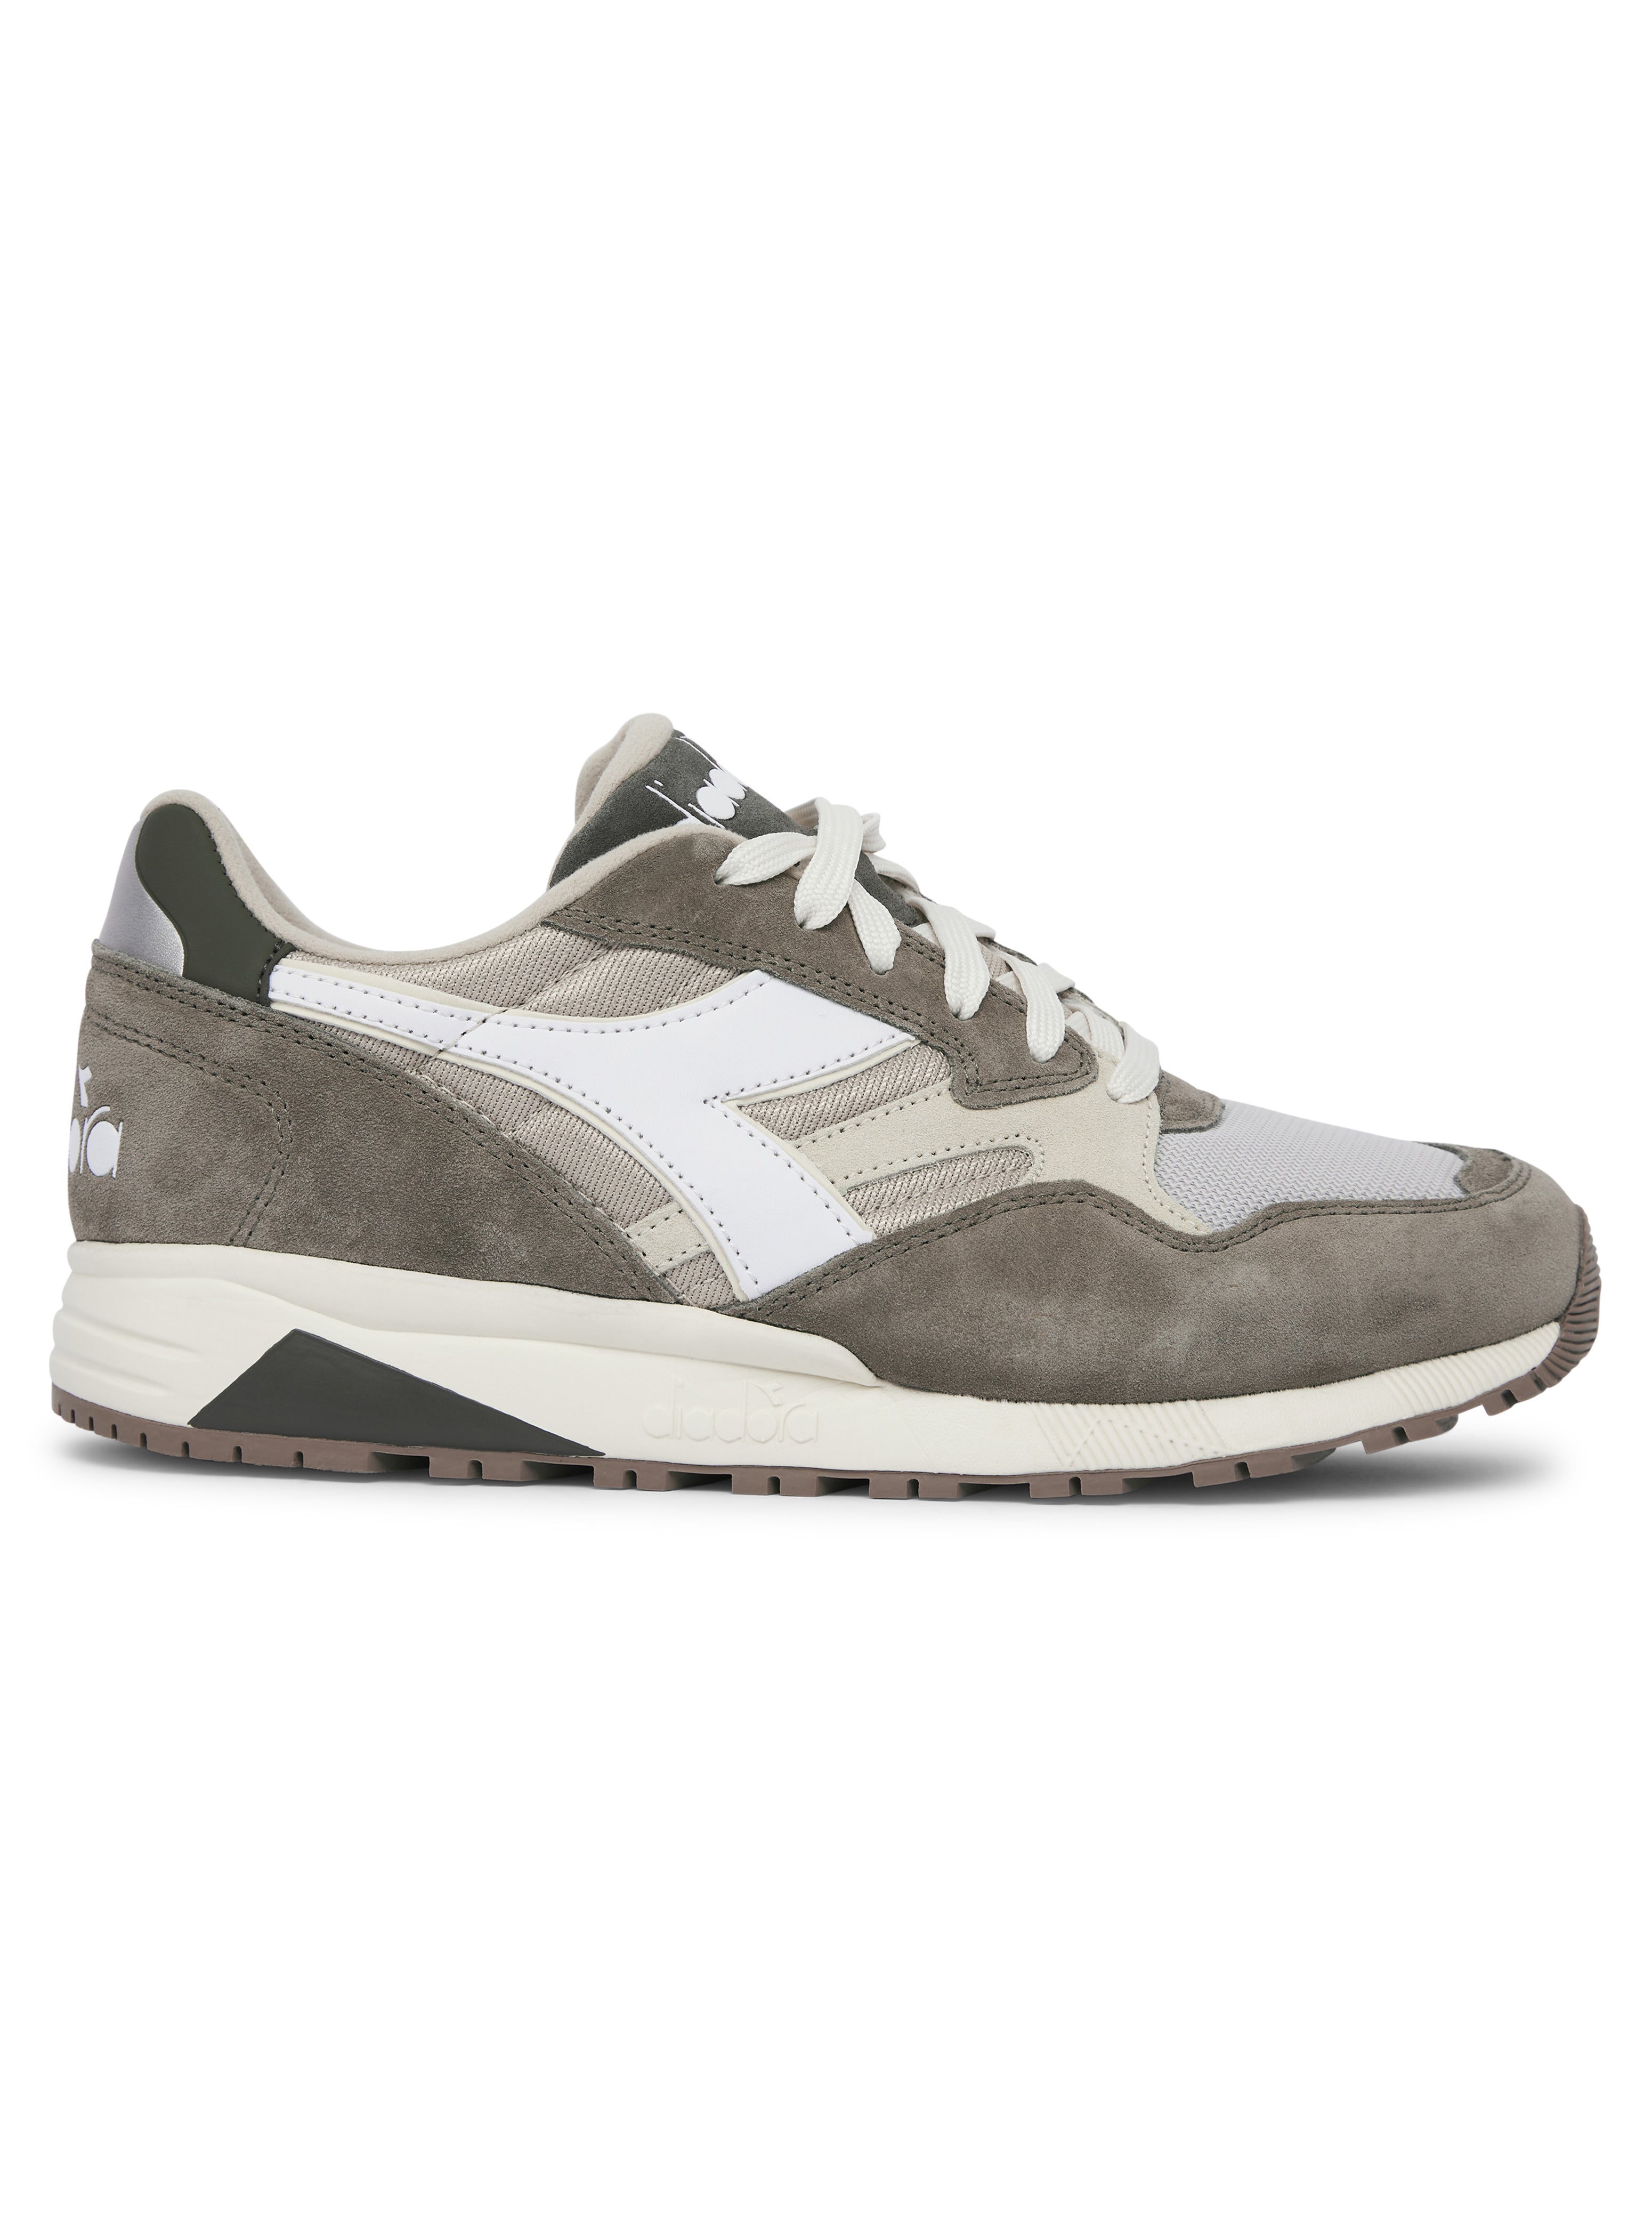 Load image into Gallery viewer, Diadora N902 Trainer Tan
